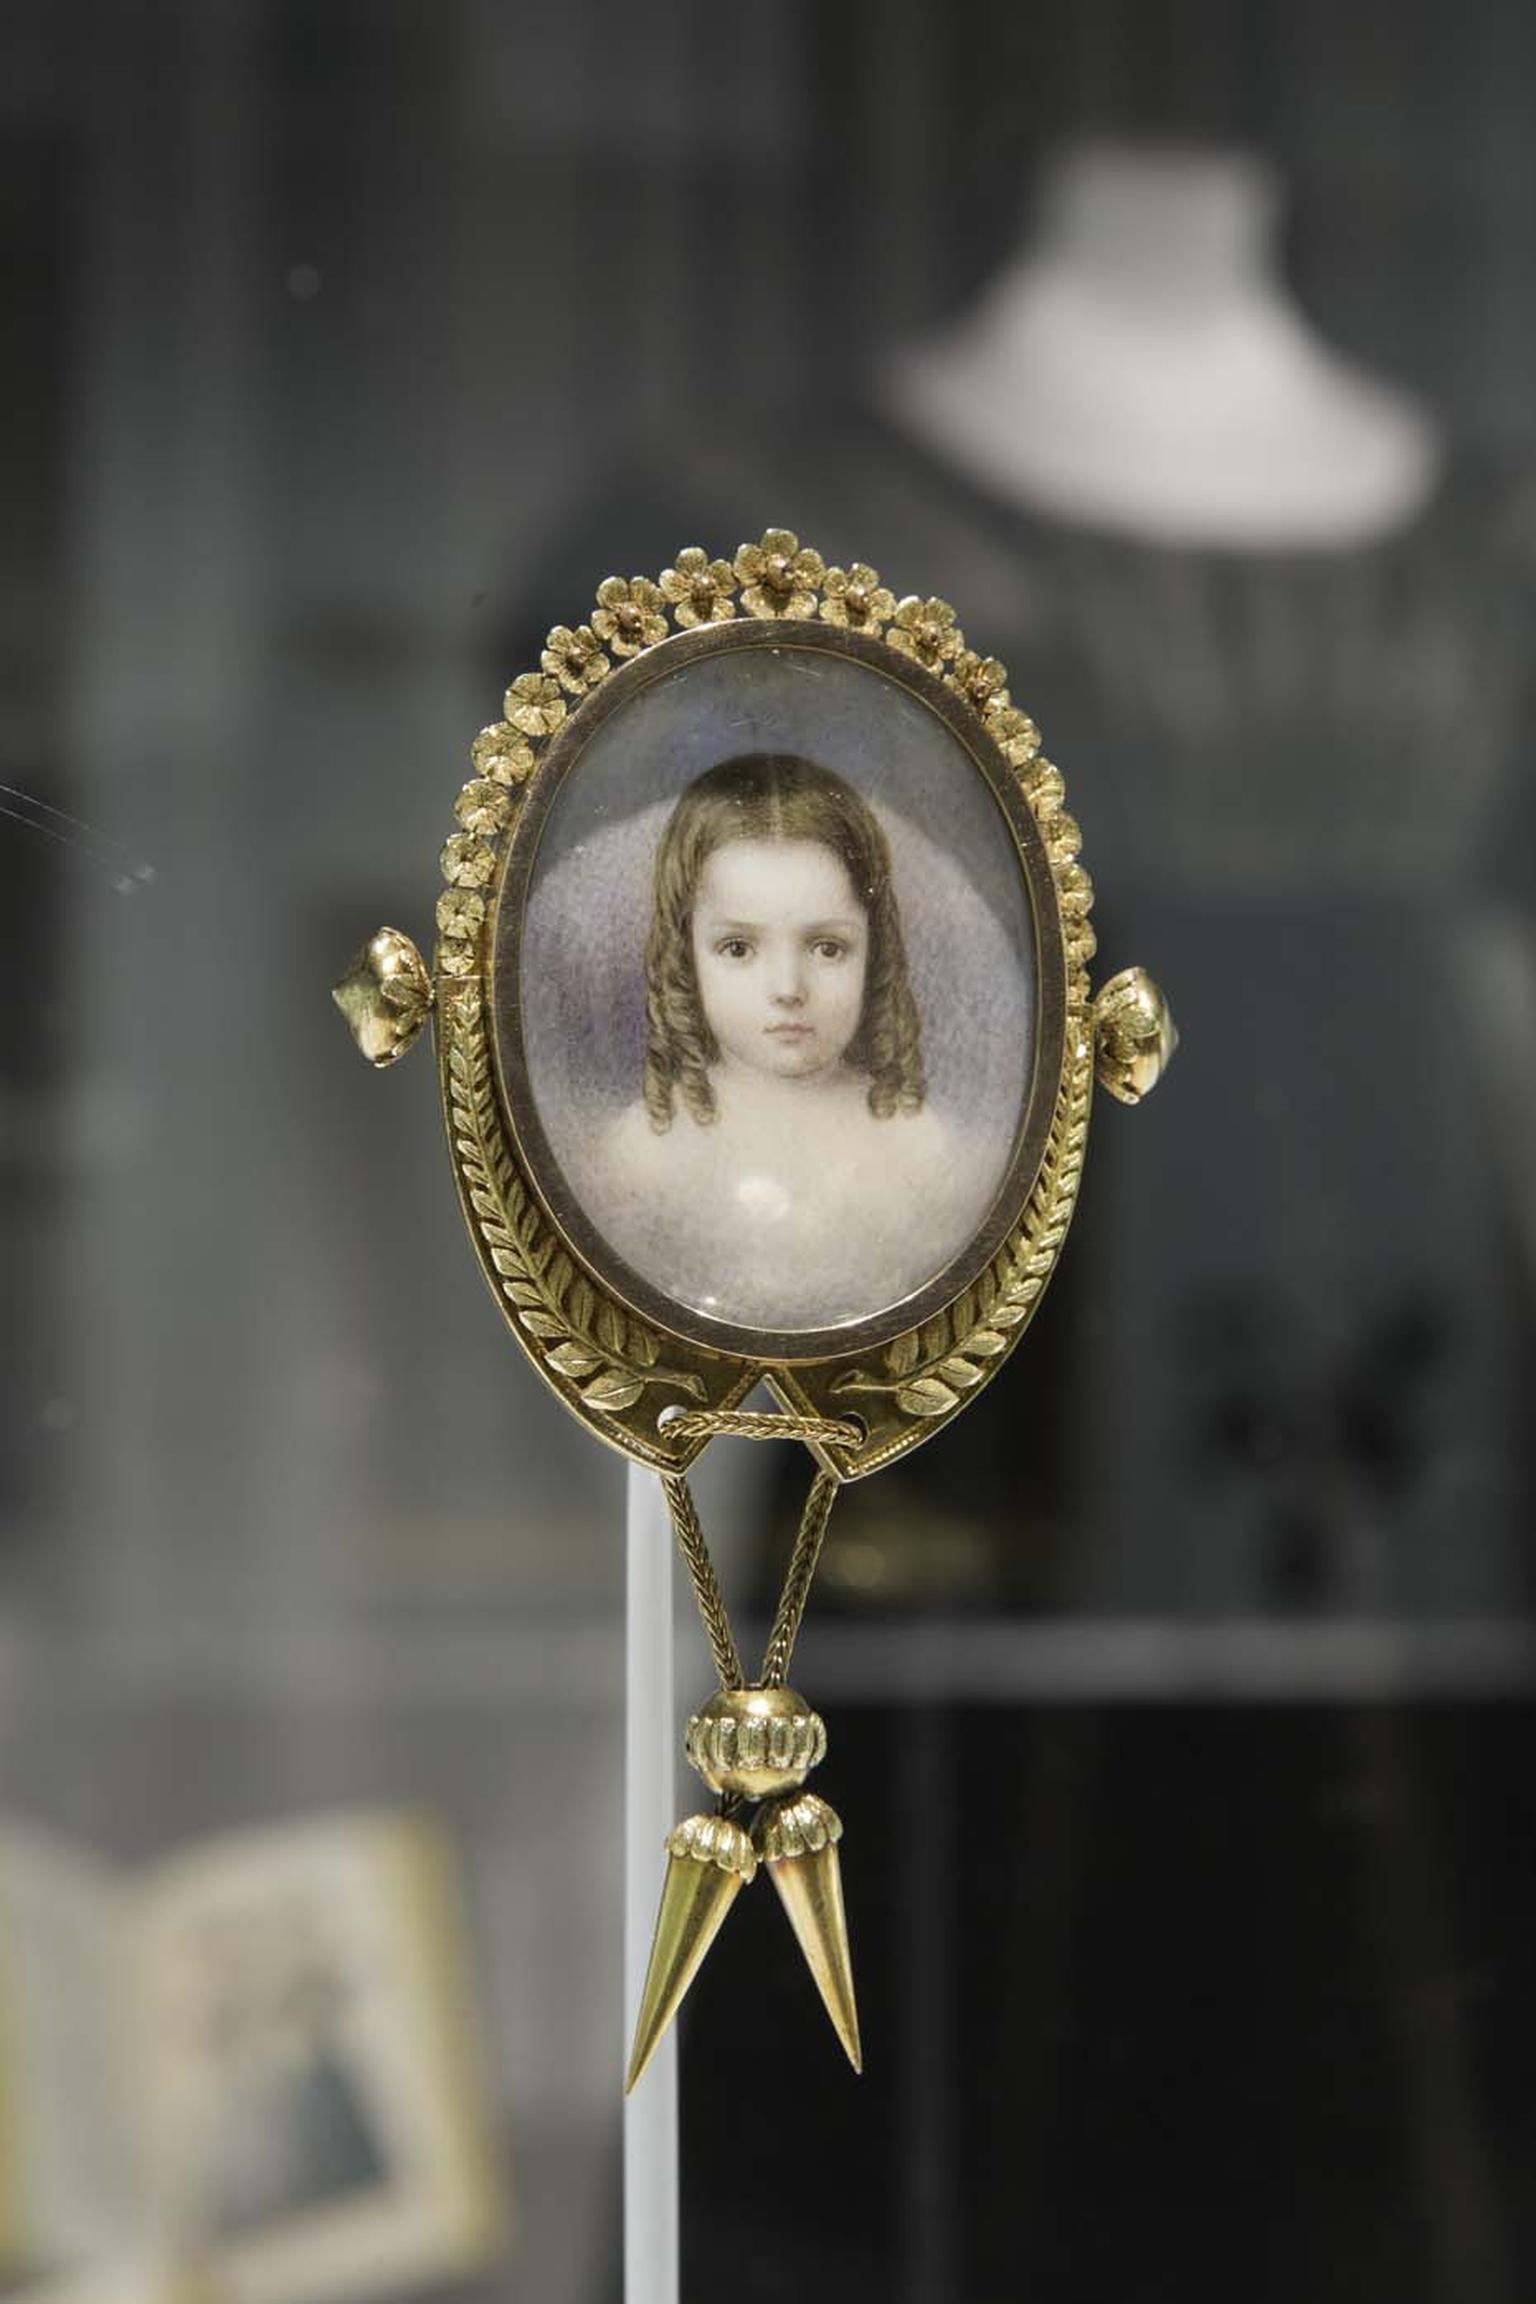 Mourning jewelry included miniature portraits or photographs of the dead often accompanied by motifs of tombstones or clouds, depicting the departed soul’s ascension to heaven.